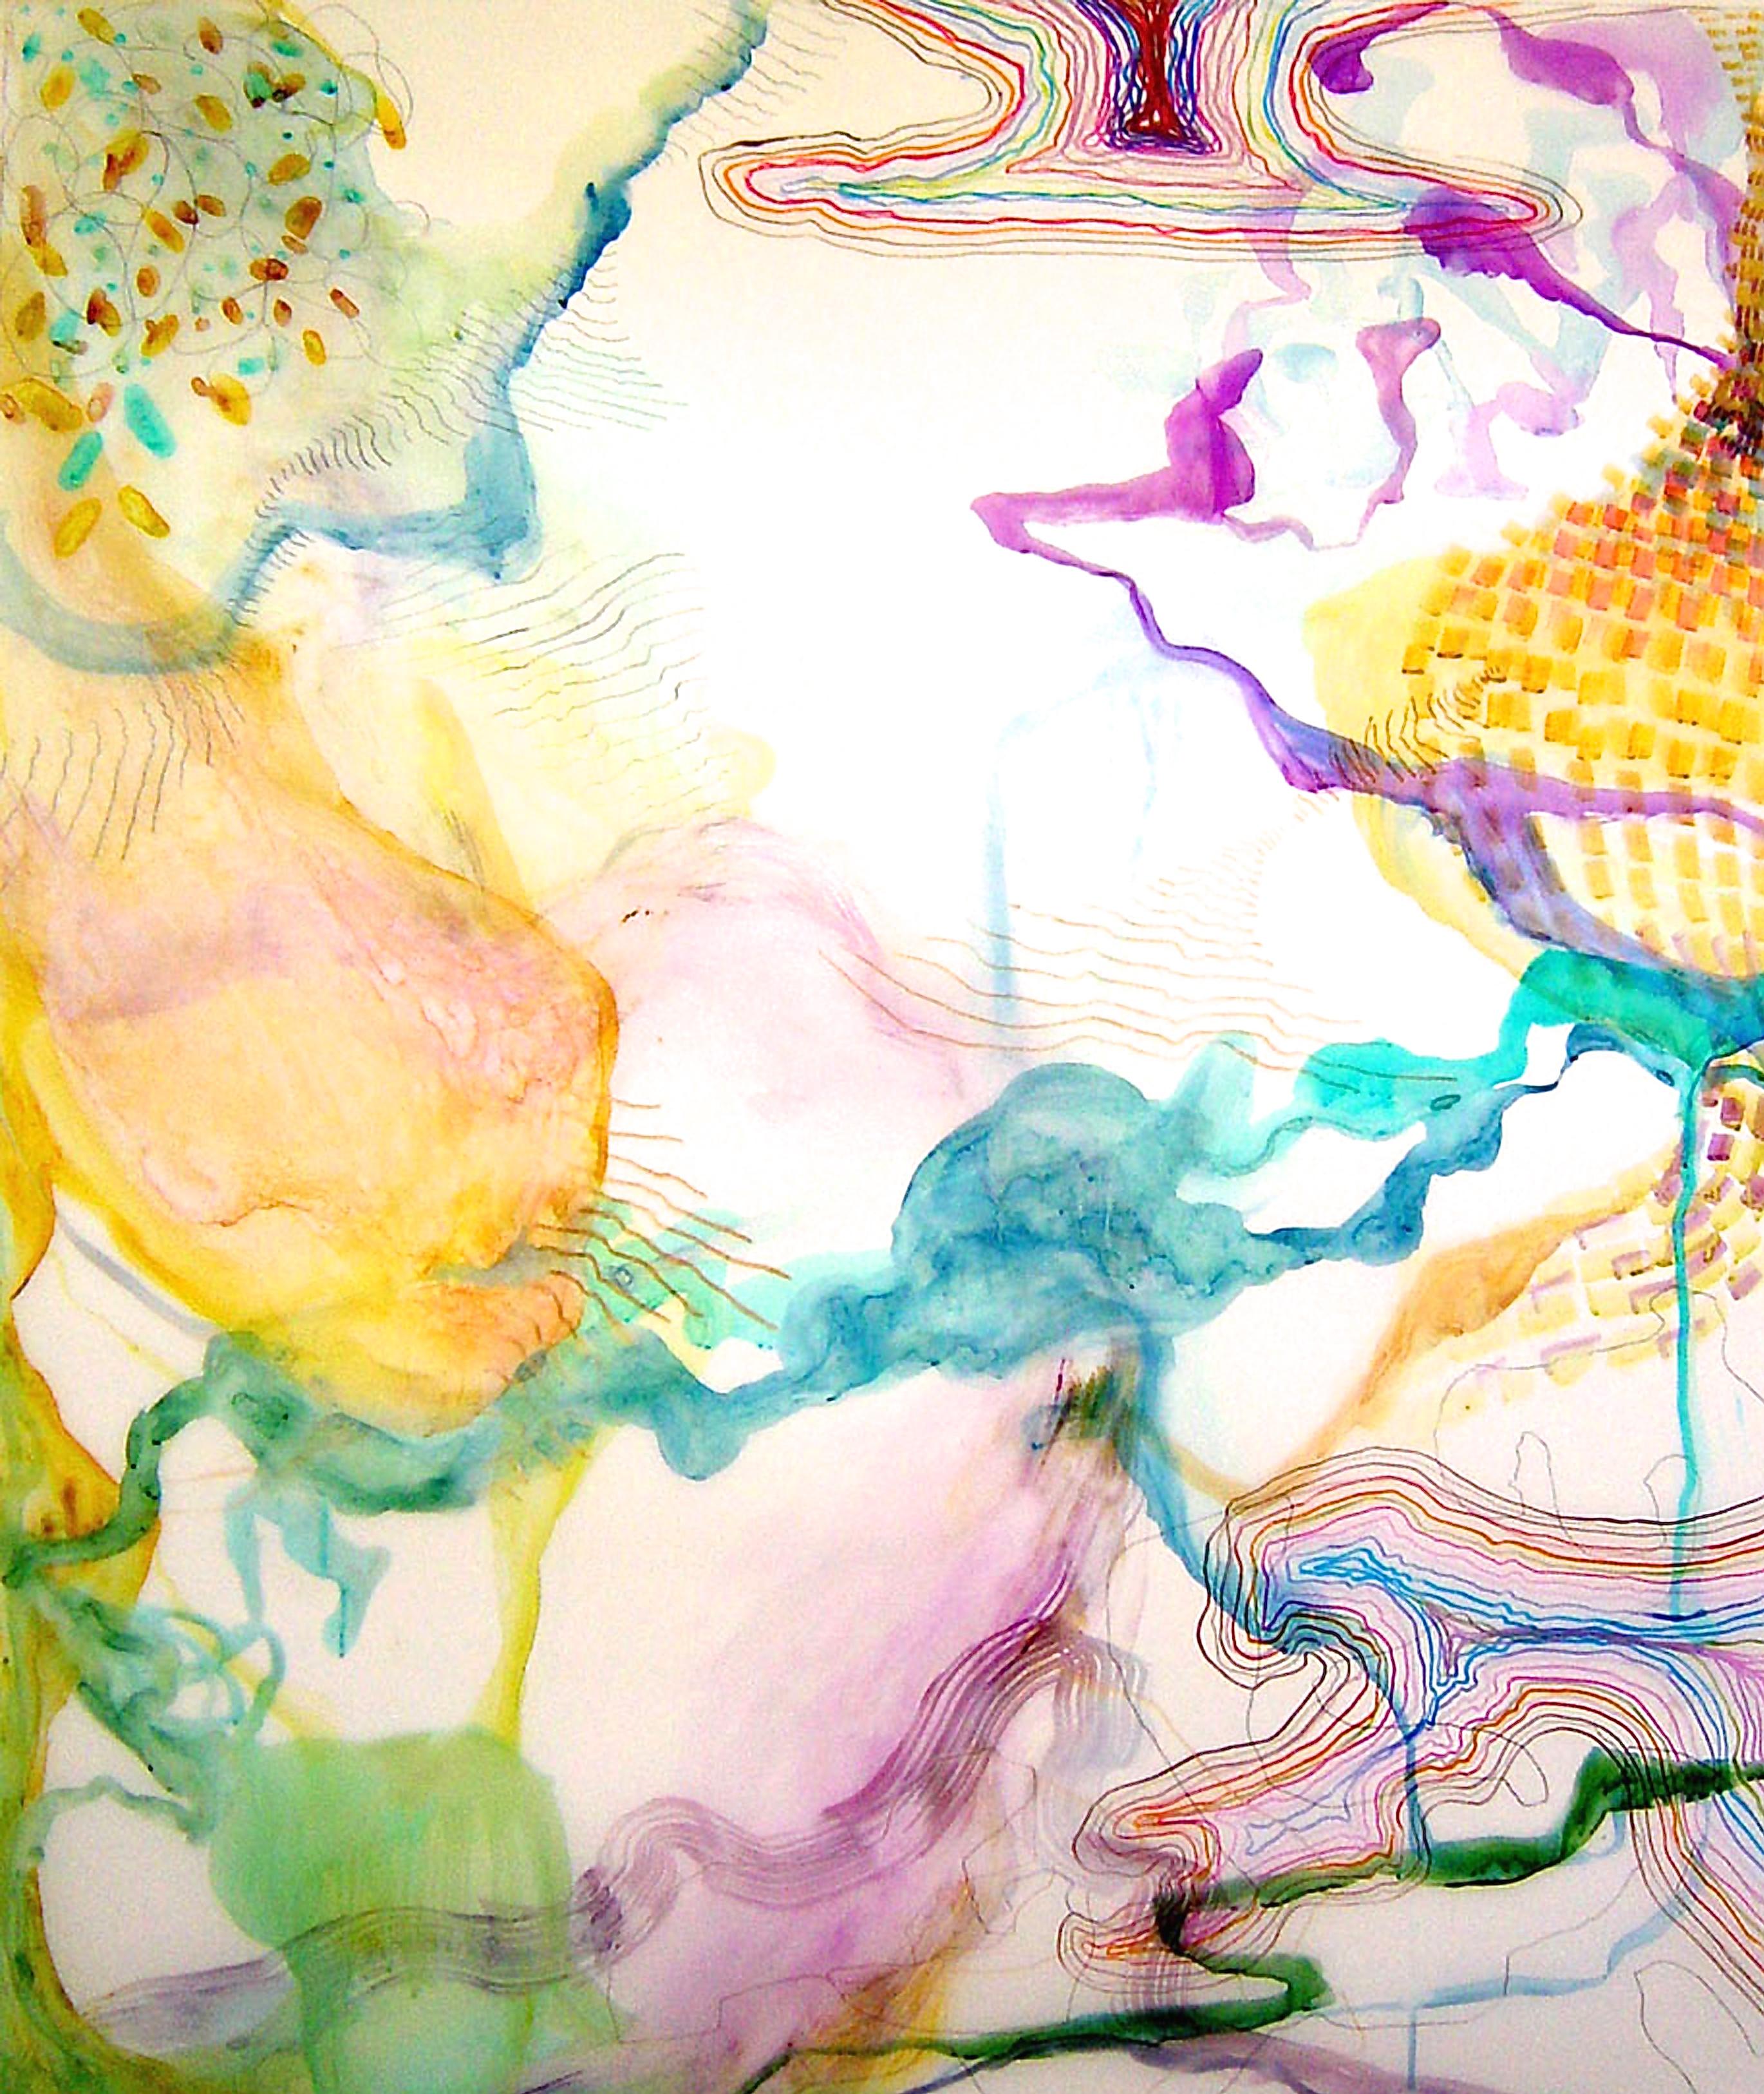 "Trace #12"  Large fluid abstraction, colorful, purple, yellow, turquoise, green